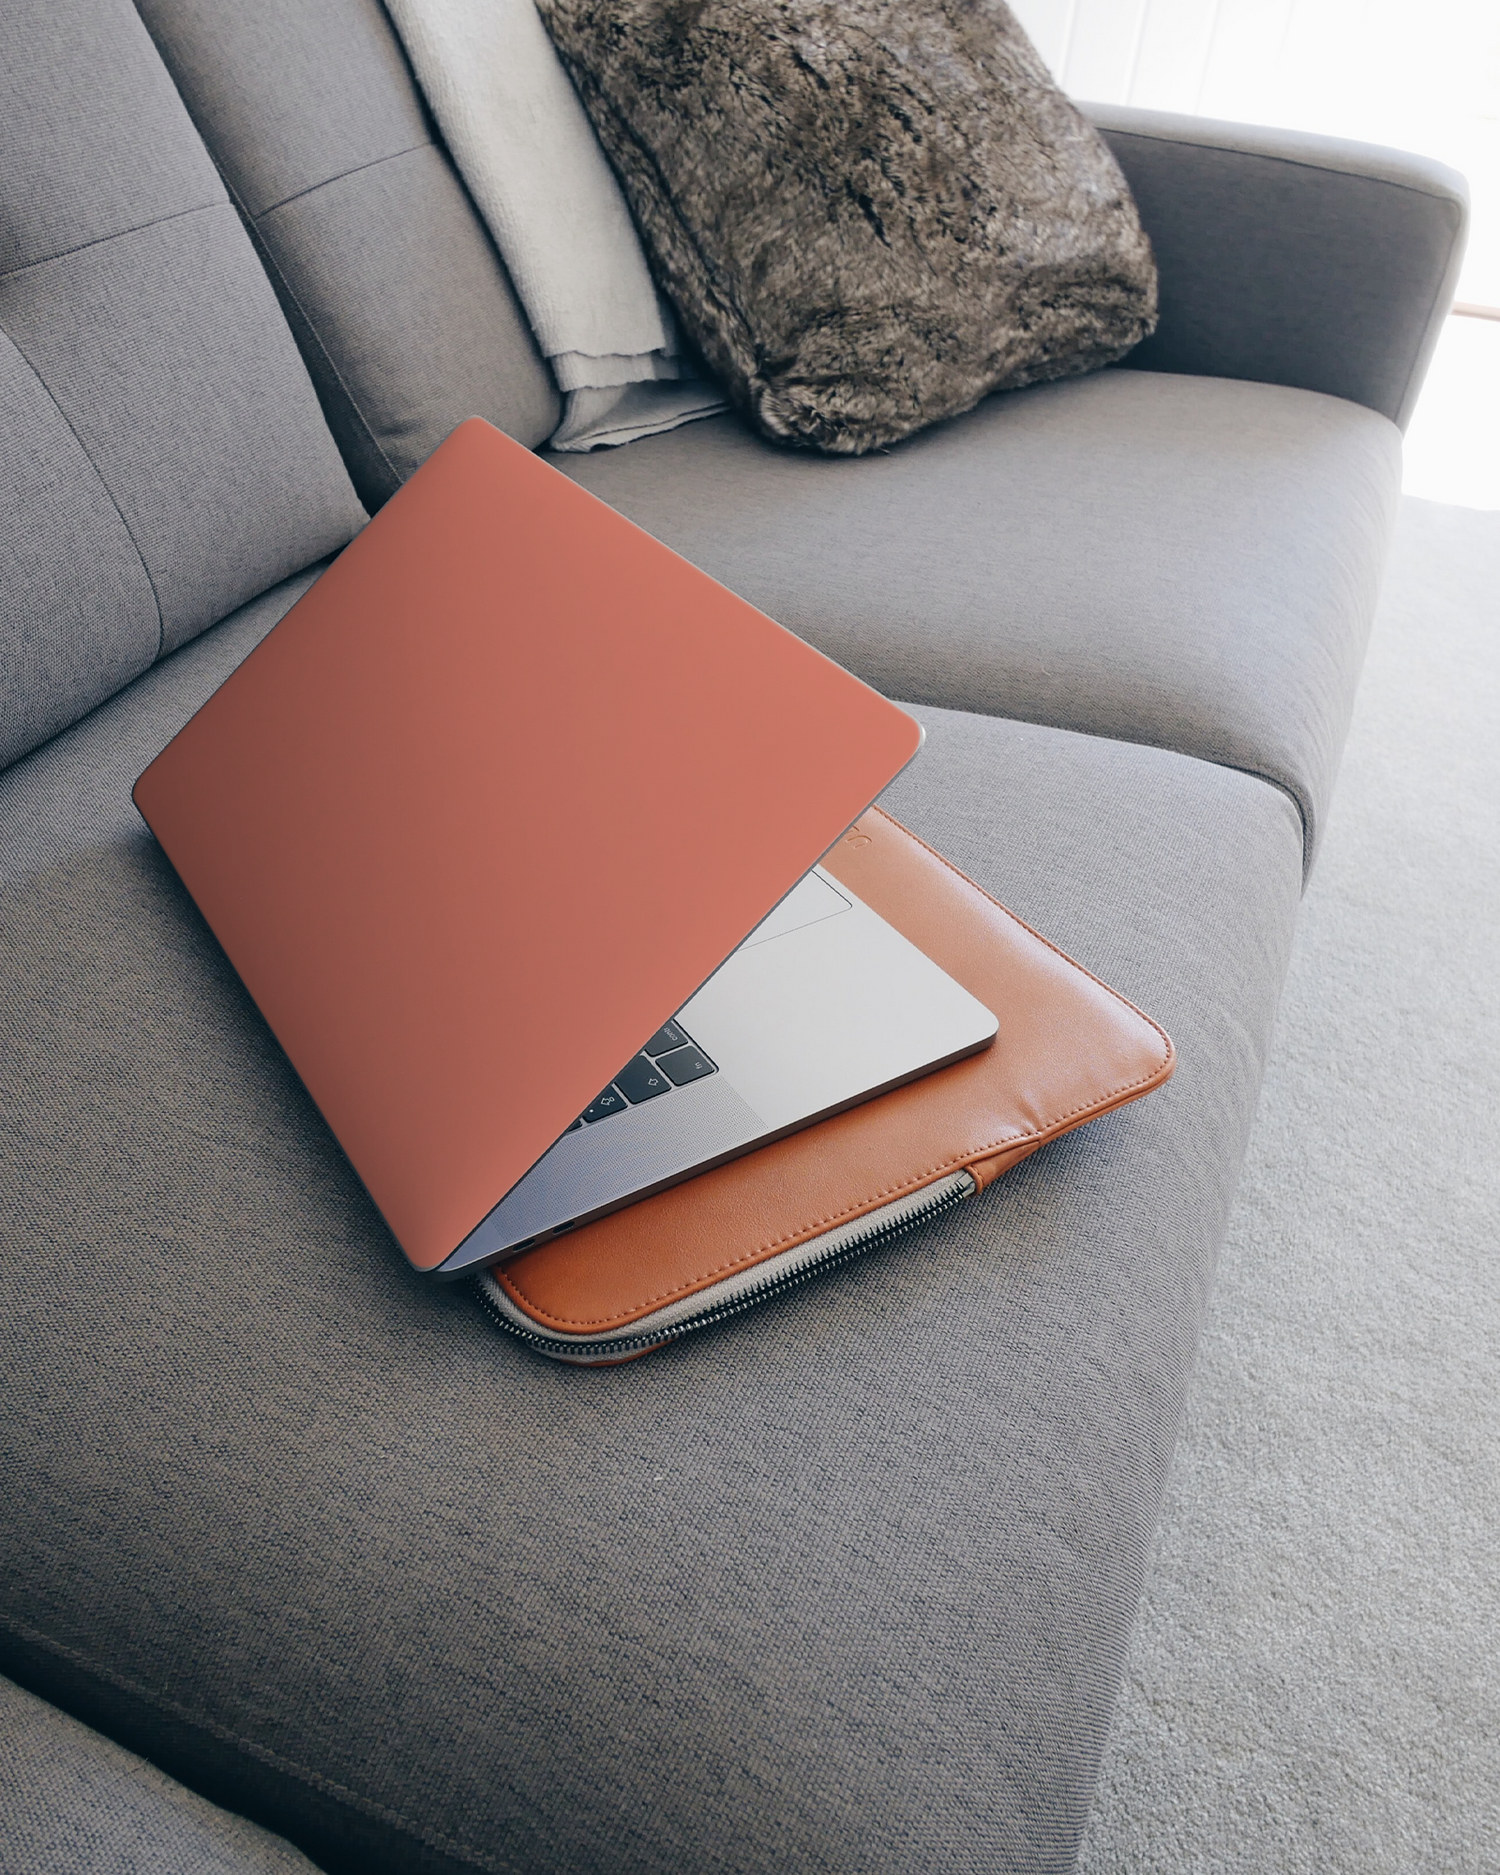 DEEP CORAL Laptop Skin for 15 inch Apple MacBooks on a couch